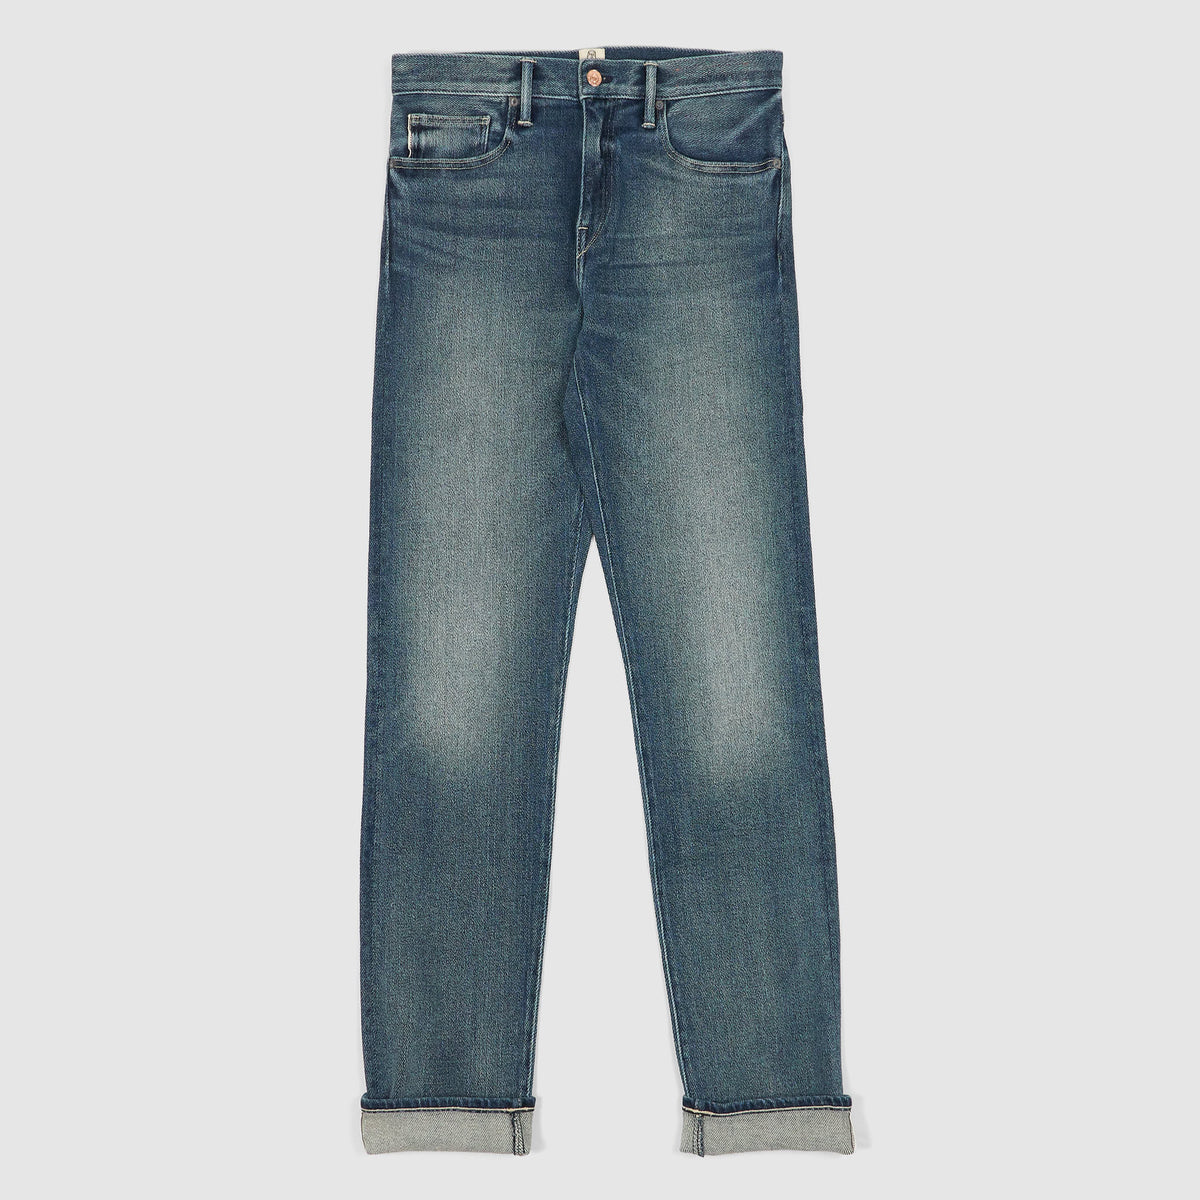 Hiroshi Kato The Pen Zip Fly 11.5 OZ Air Selvage Classic Fit